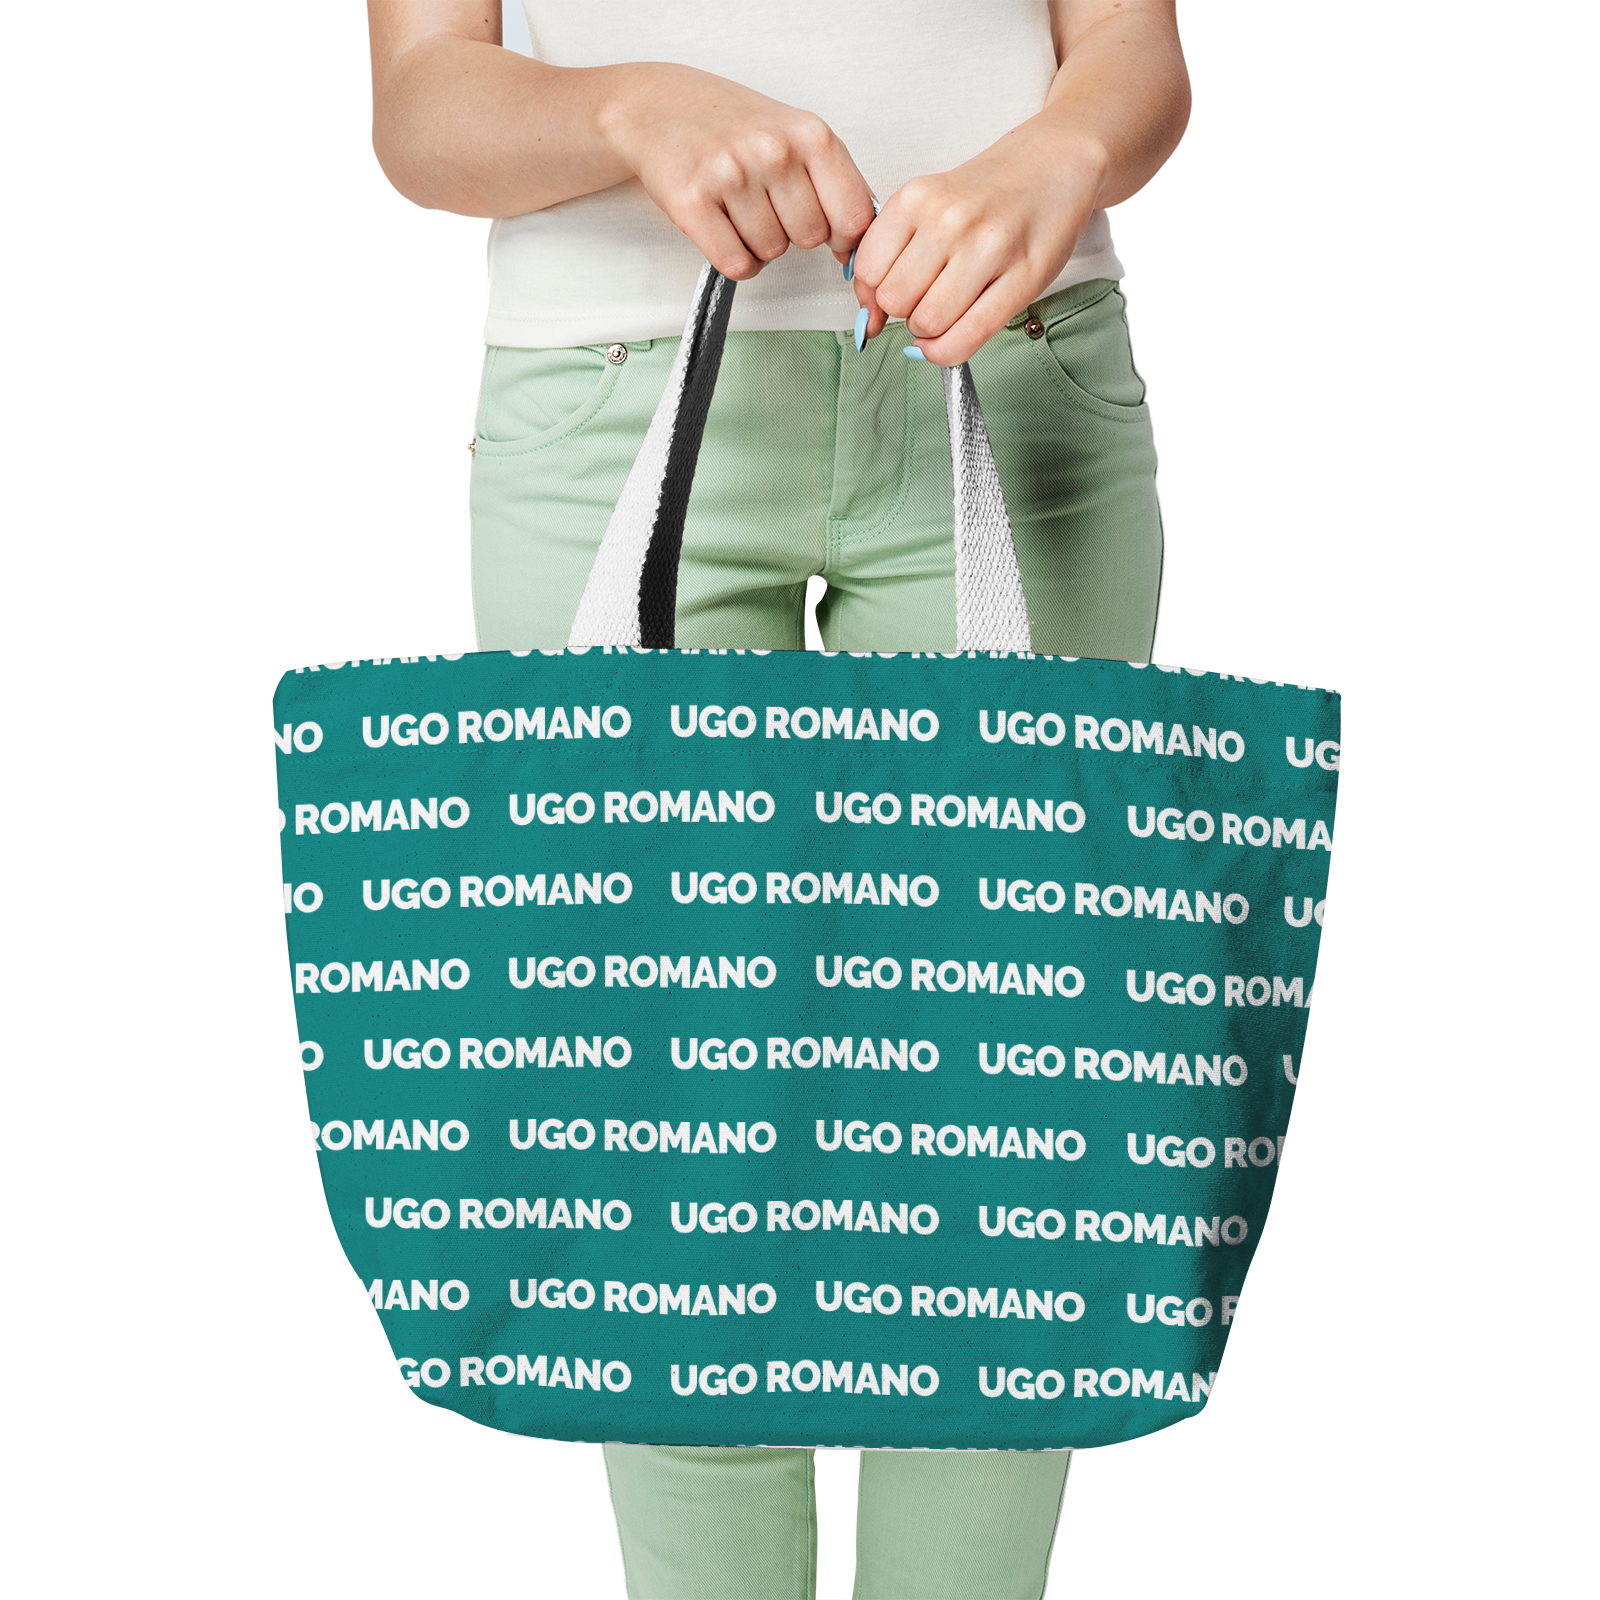 Heavy Duty and Strong Natural Cotton Canvas Tote Bag - UGO ROMANO URTB039